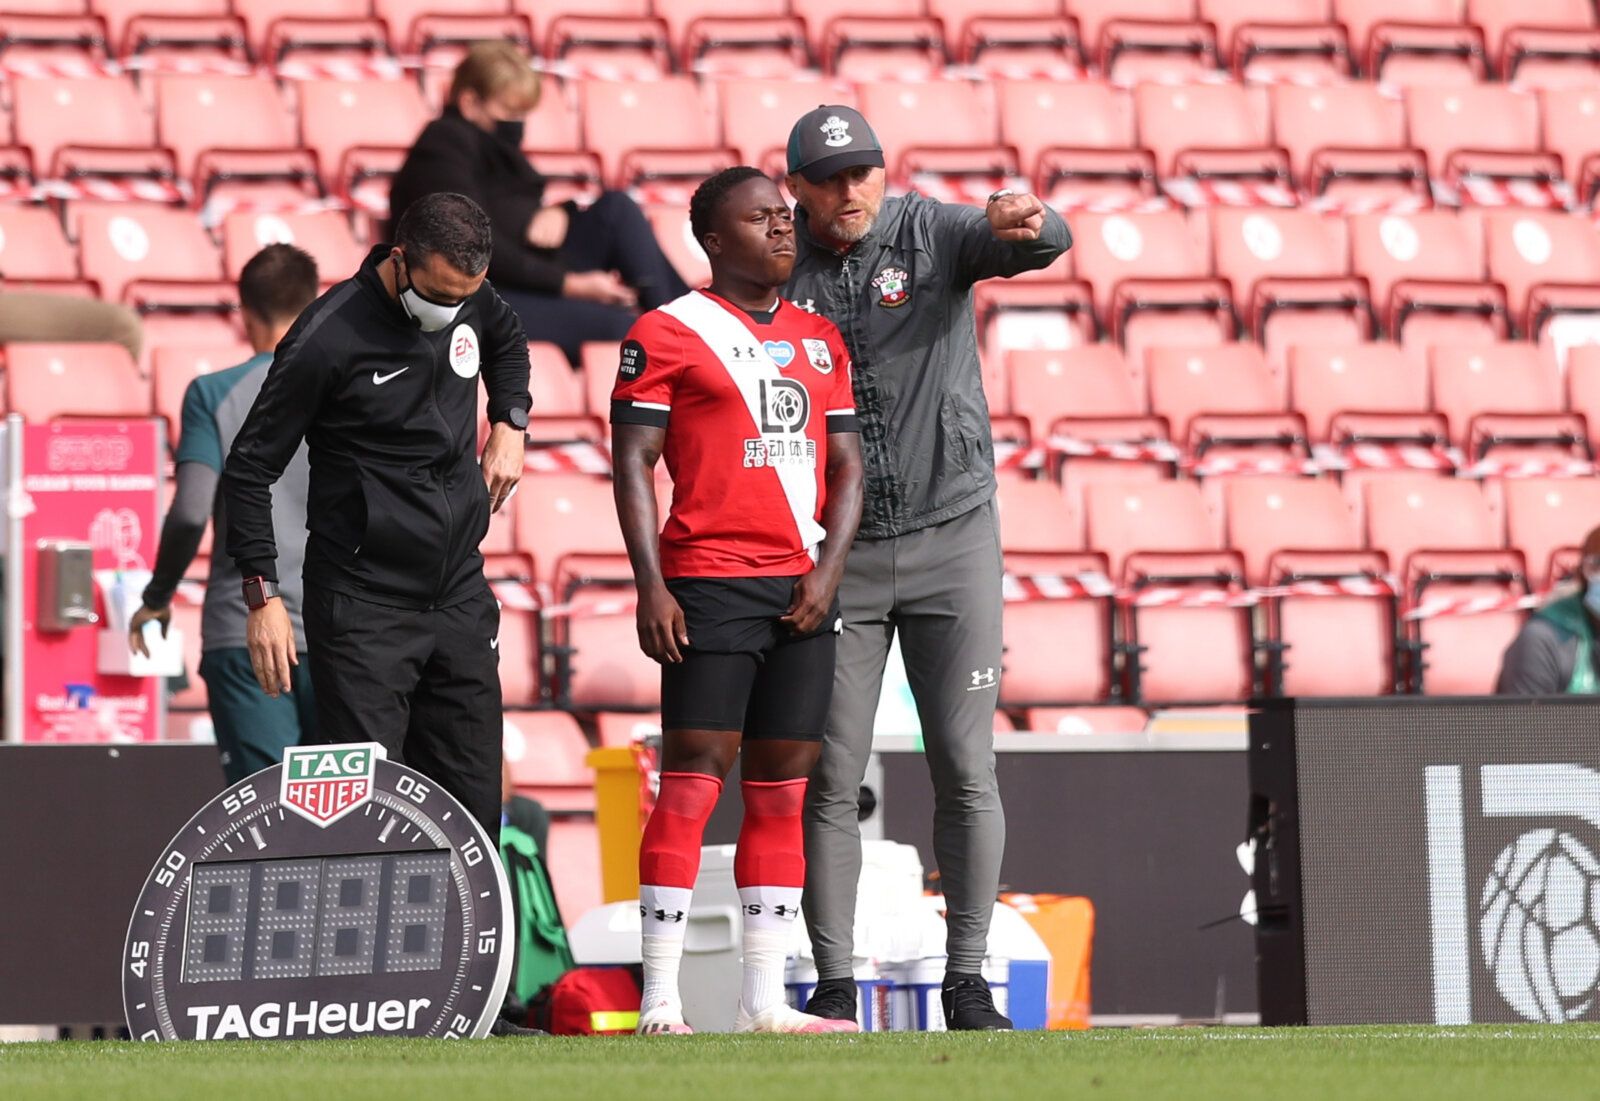 Soccer Football - Premier League - Southampton v Sheffield United - St Mary's Stadium, Southampton, Britain - July 26, 2020  Southampton manager Ralph Hasenhuttl talks to Michael Obafemi during the match, as play resumes behind closed doors following the outbreak of the coronavirus disease (COVID-19) Pool via REUTERS/Naomi Baker EDITORIAL USE ONLY. No use with unauthorized audio, video, data, fixture lists, club/league logos or 'live' services. Online in-match use limited to 75 images, no video 